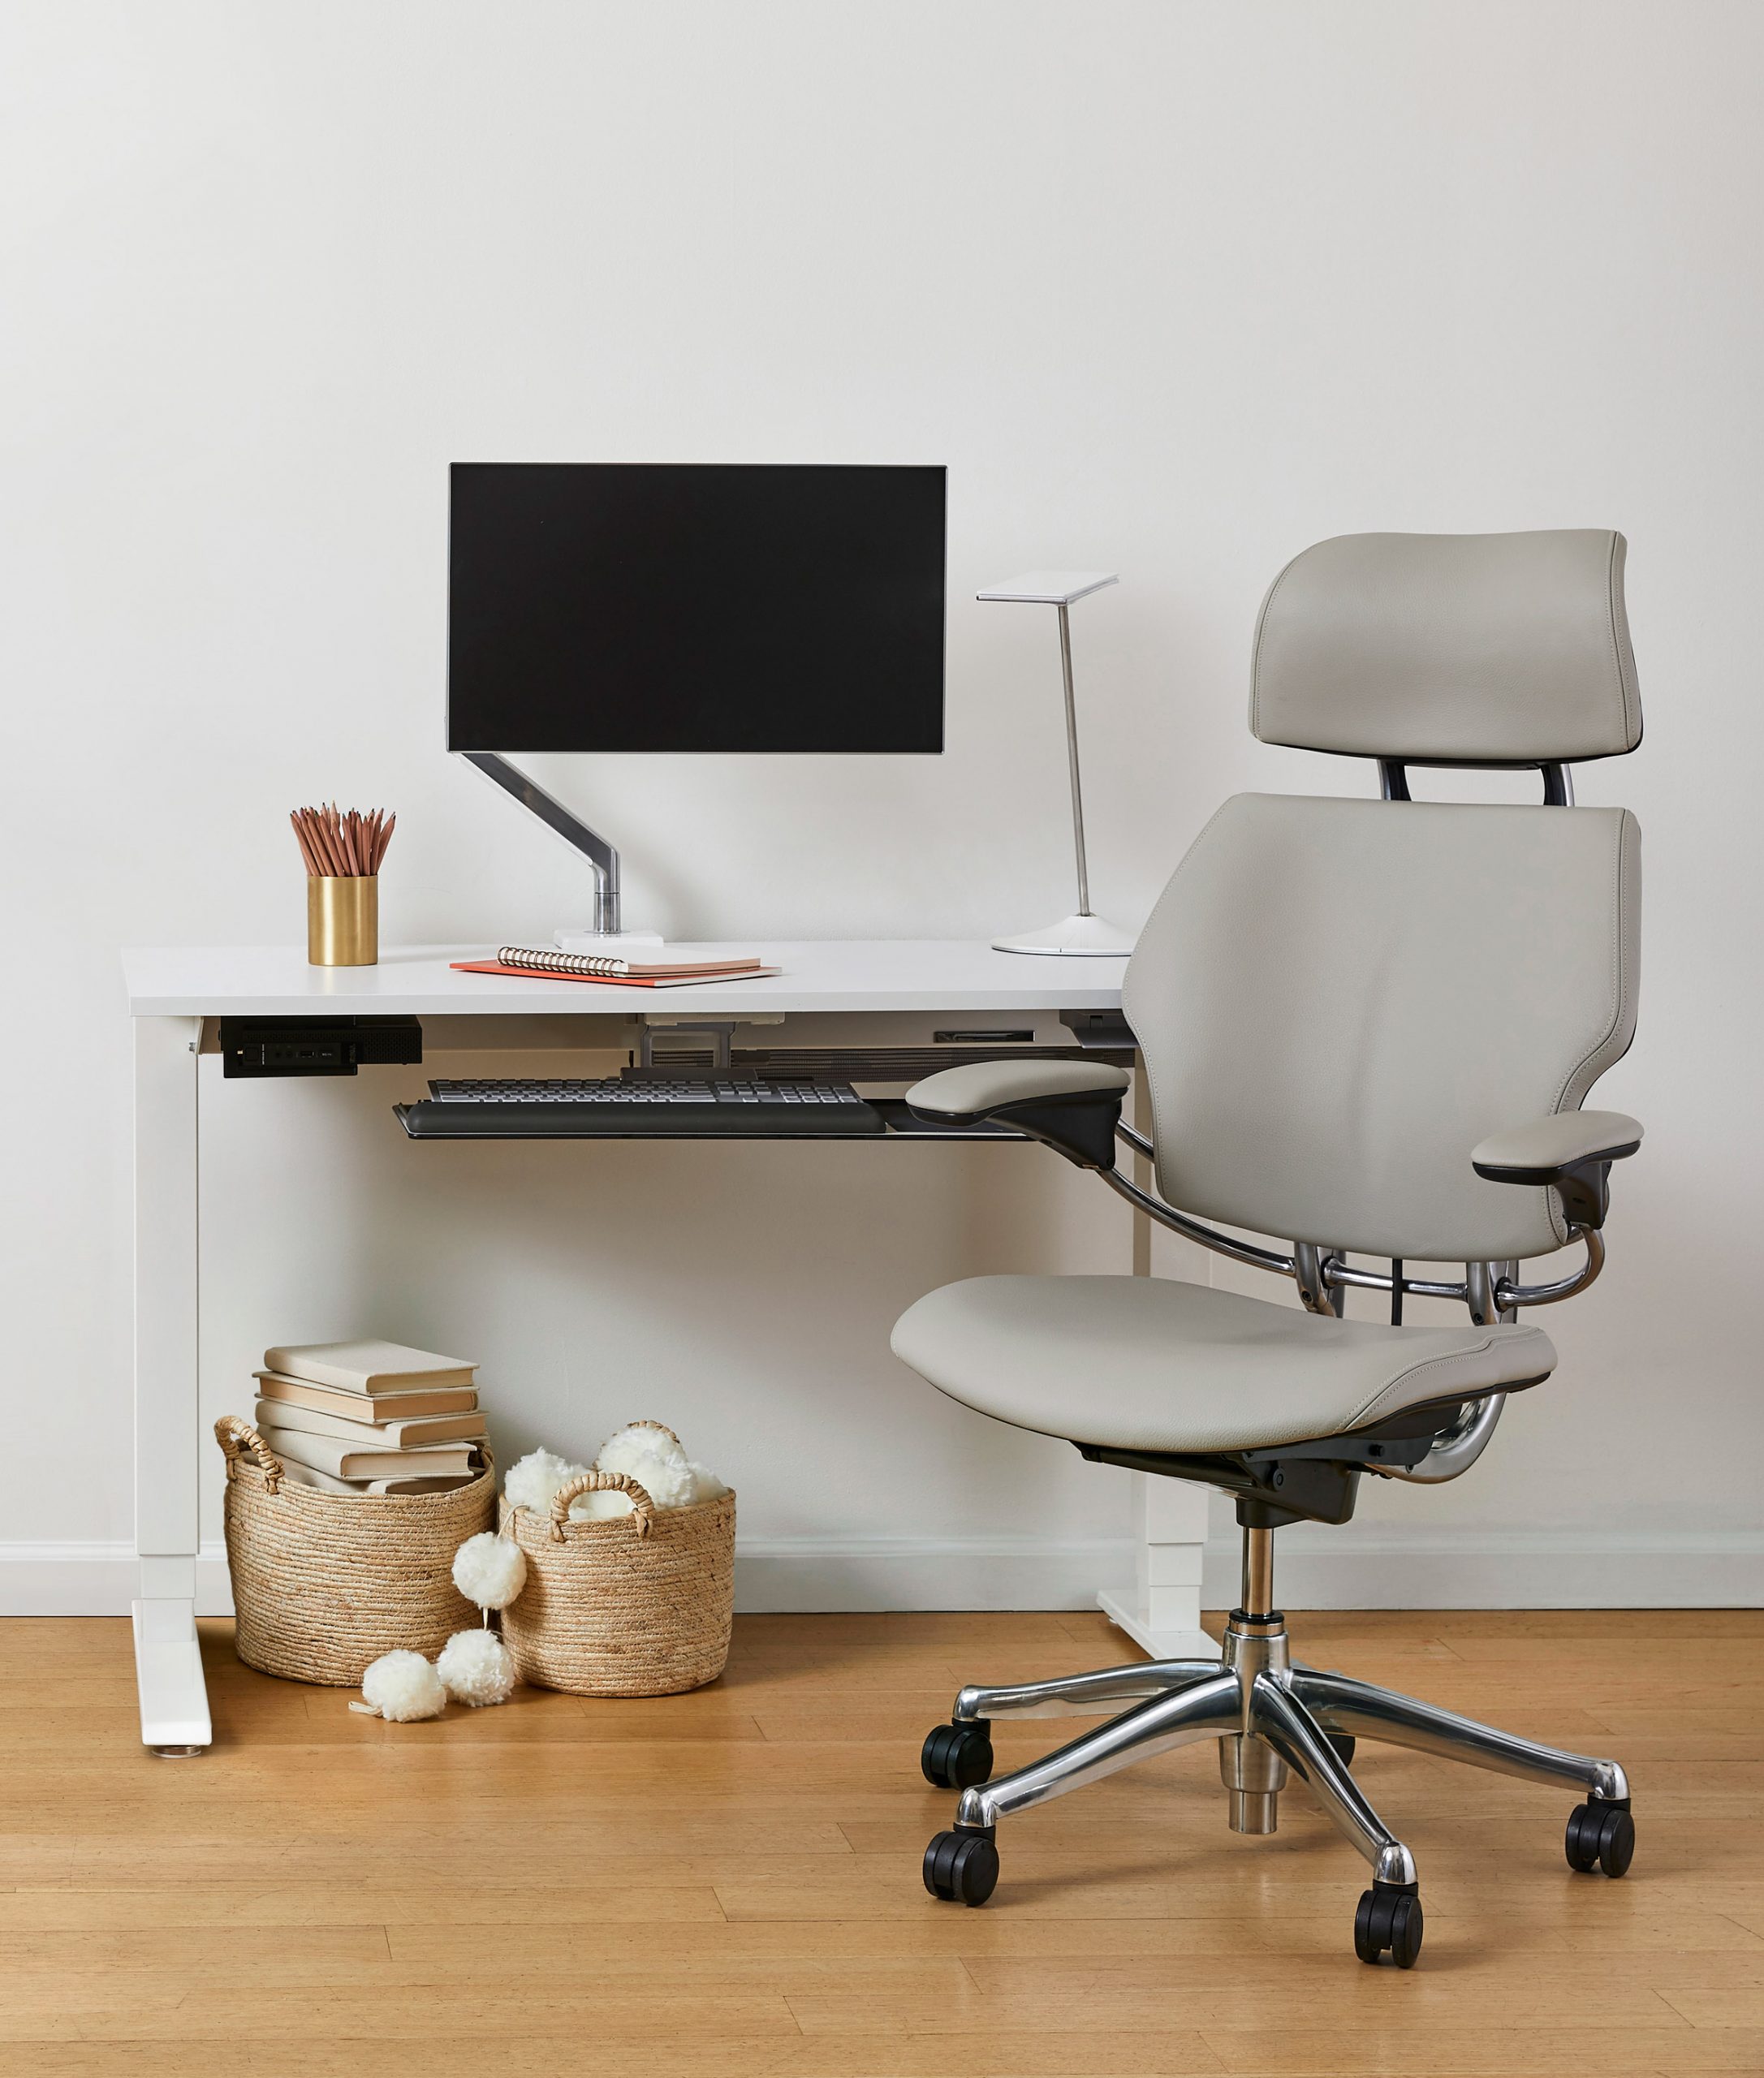 Freedom Headrest chair by Niels Diffrient for Humanscale